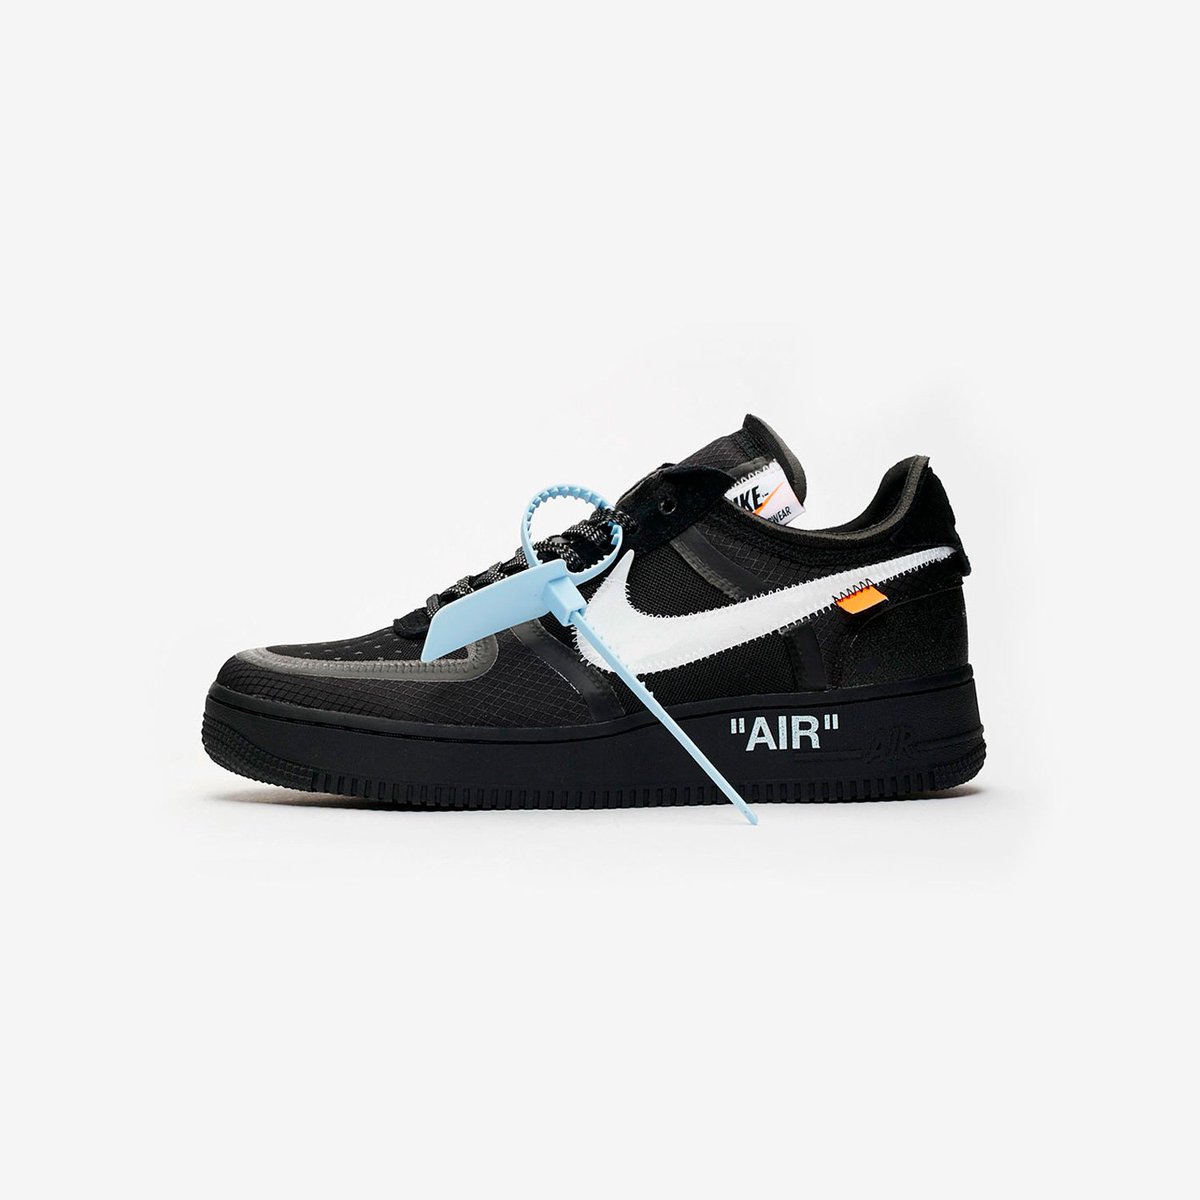 raffle off white air force 1